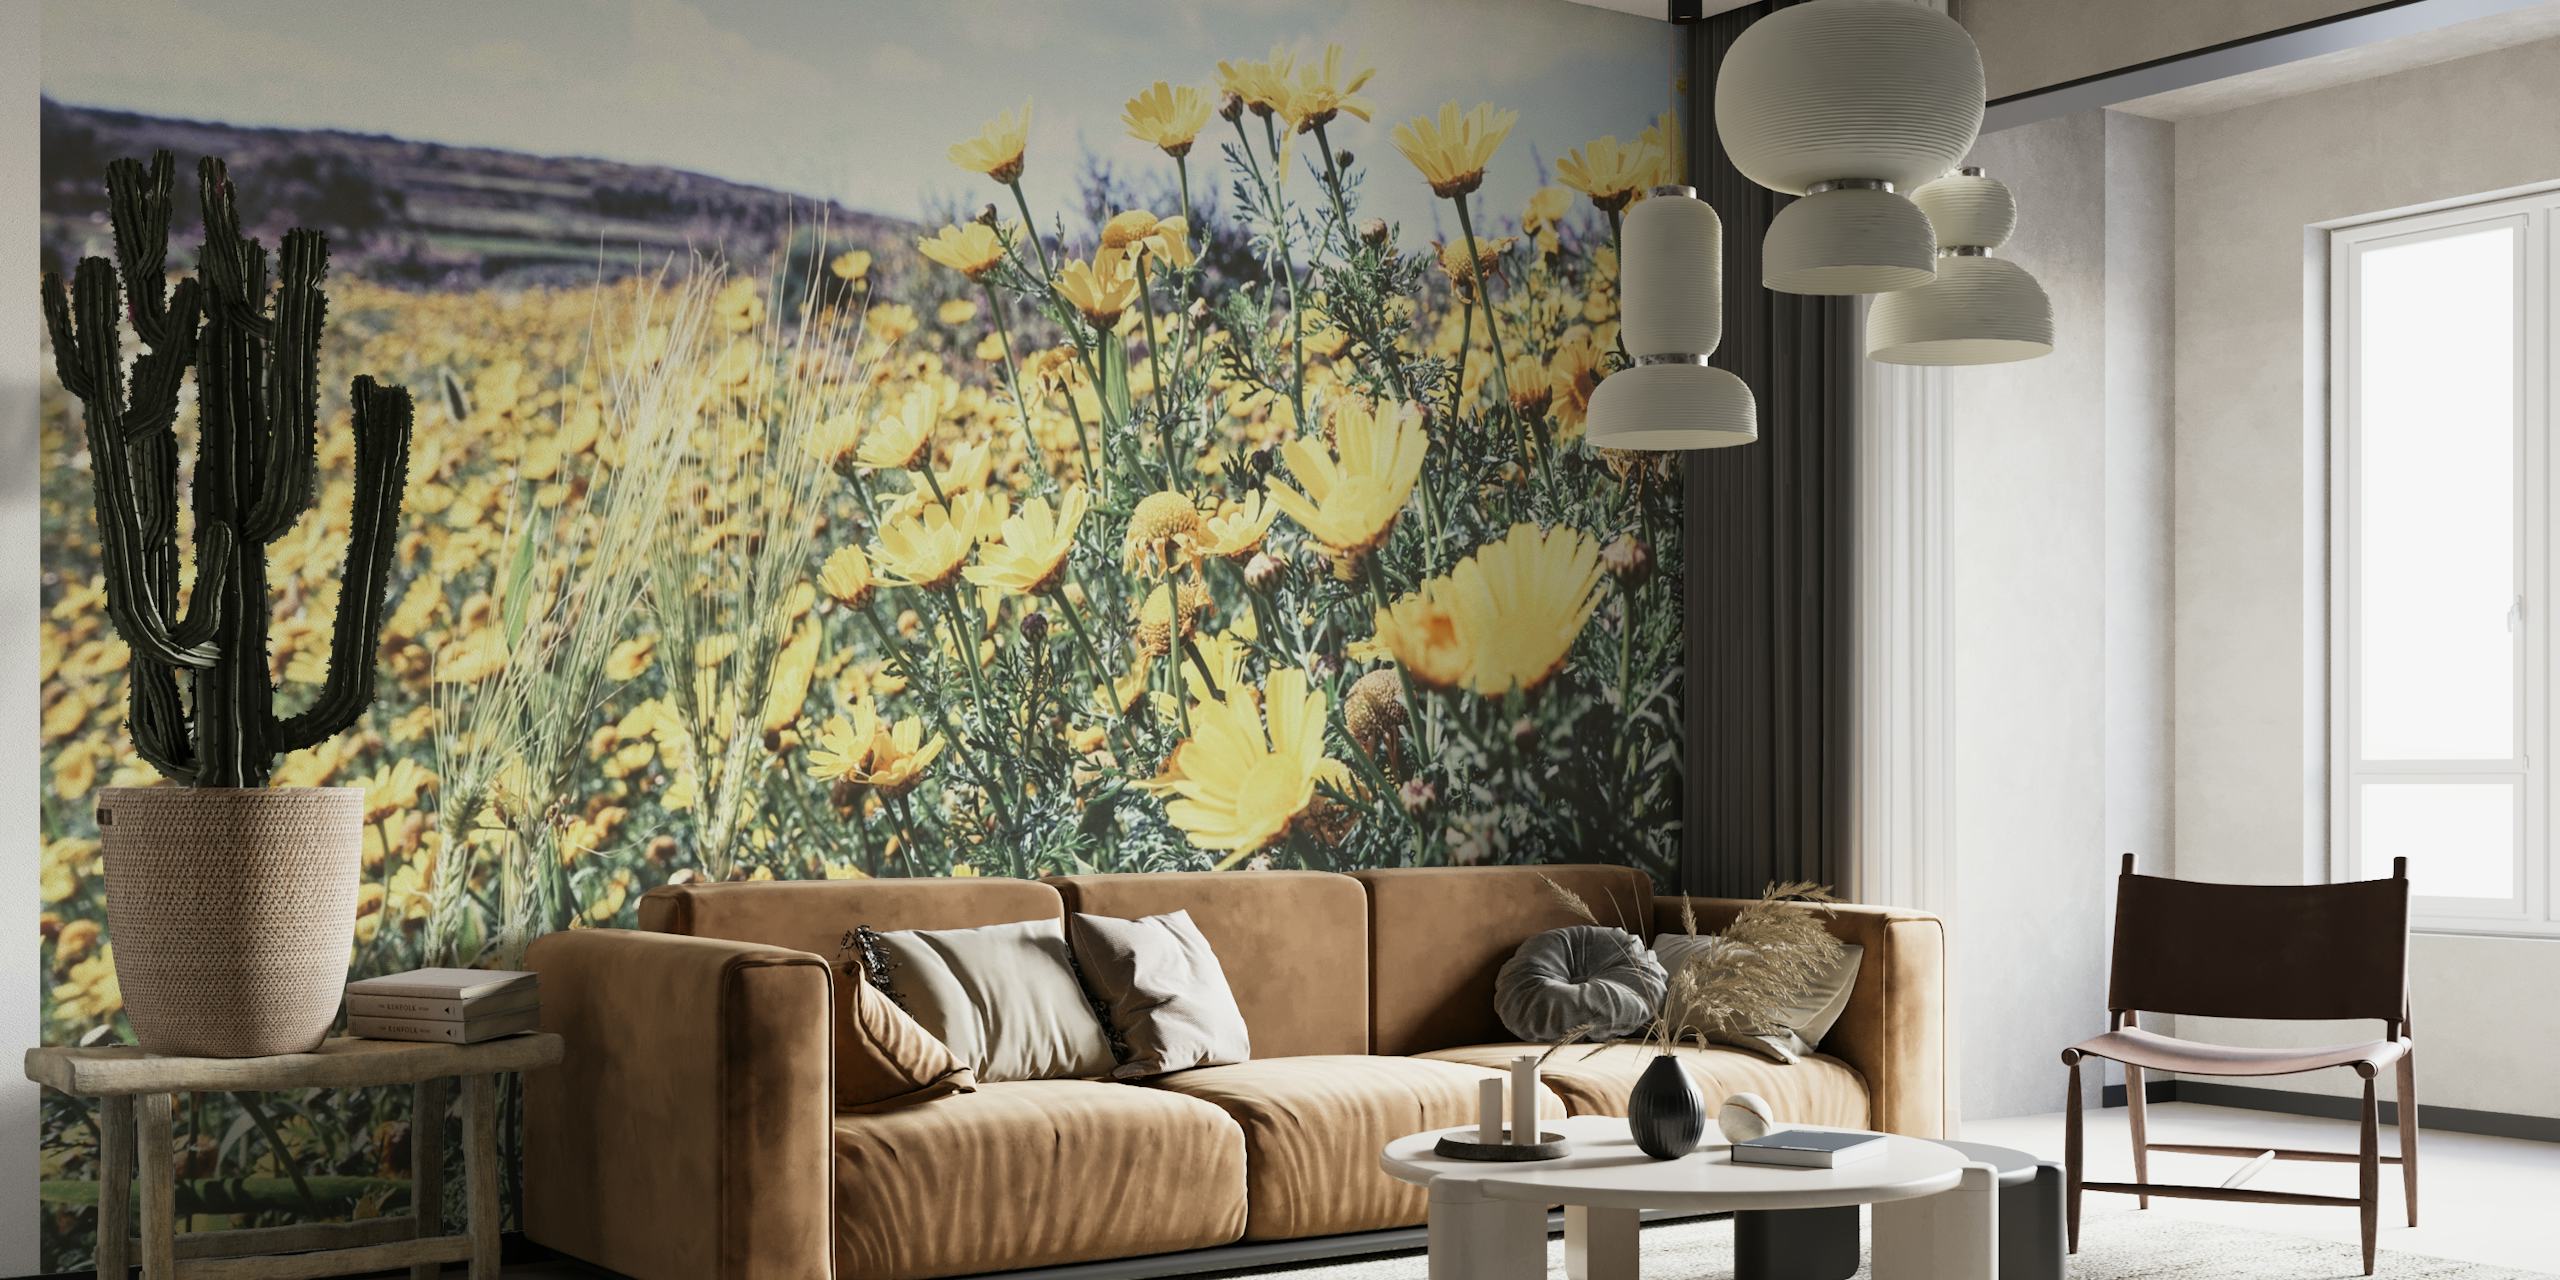 Soft Flower Field wall mural with yellow wildflowers and a sunny meadow